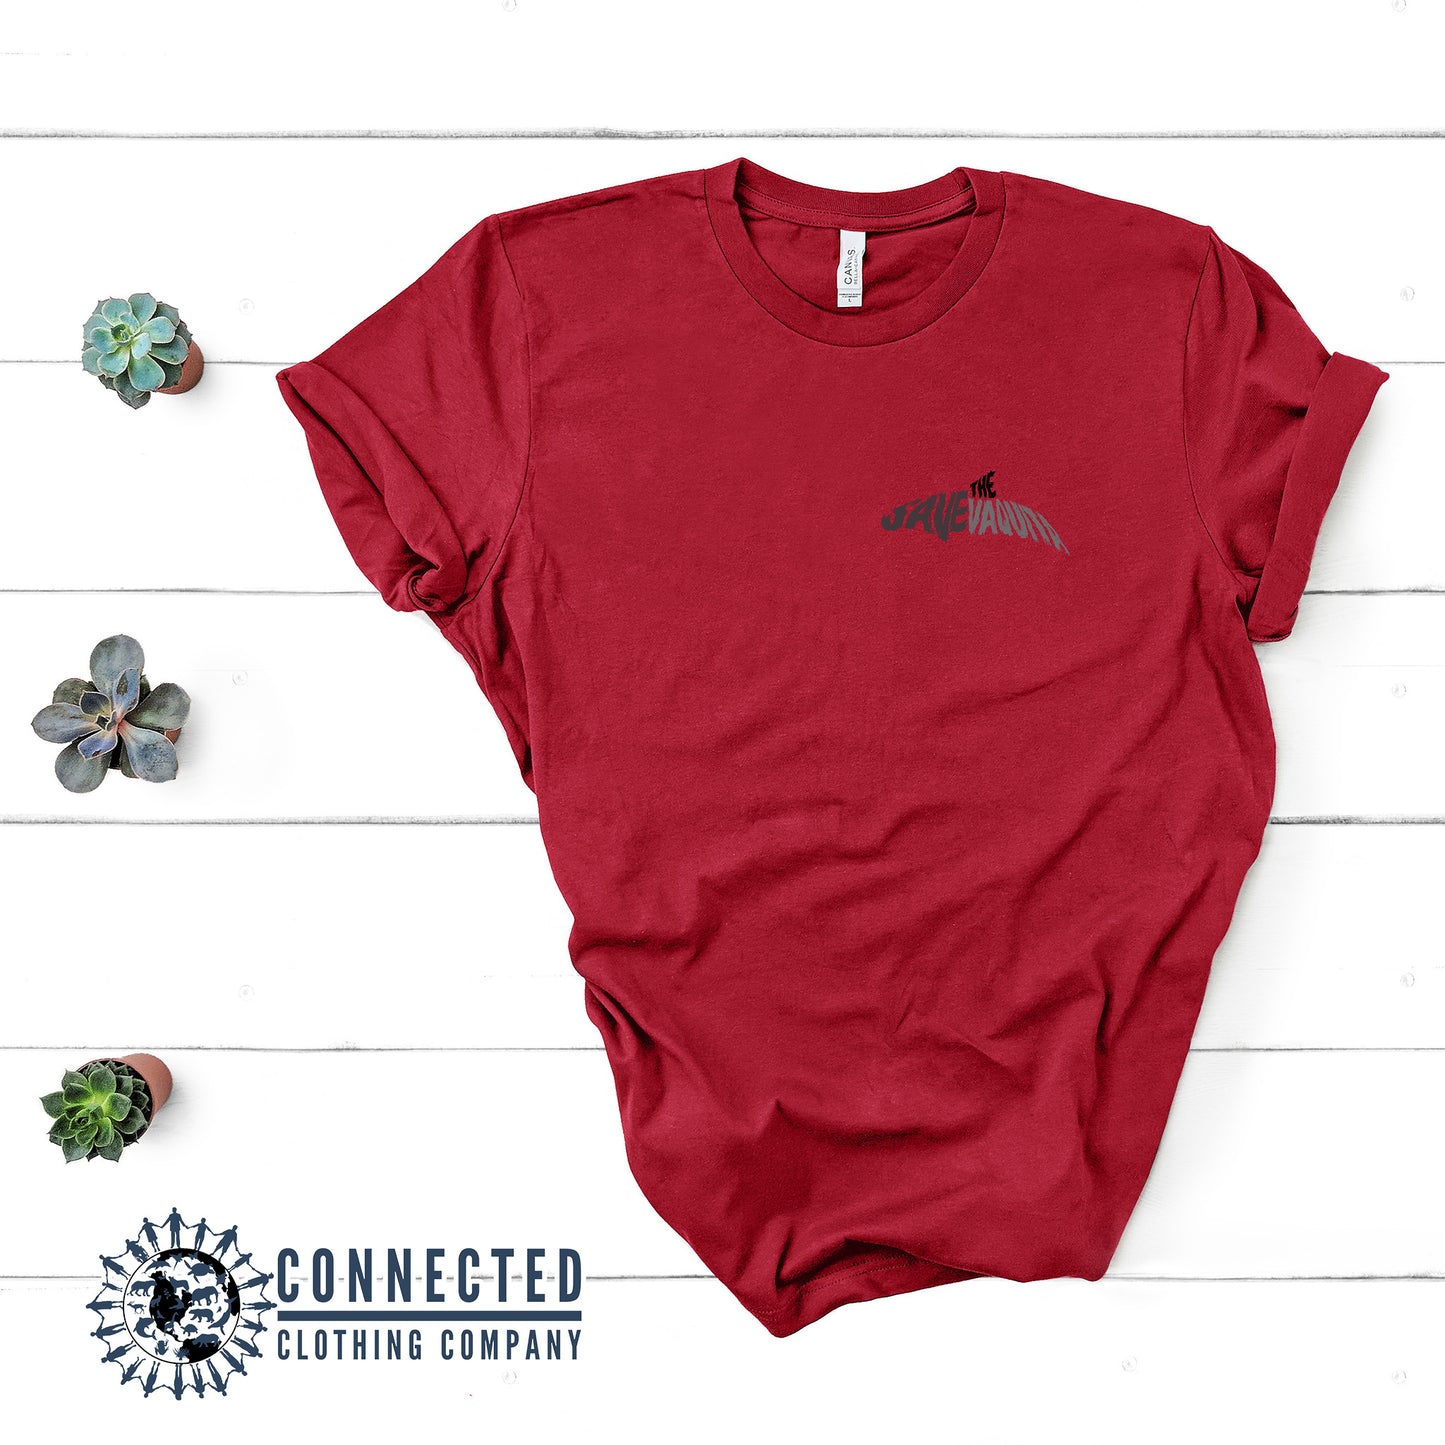 Red Save The Vaquita Short-Sleeve Tee - sweetsherriloudesigns - Ethically & Sustainably Made - 10% of profits donated to vaquita porpoise conservation